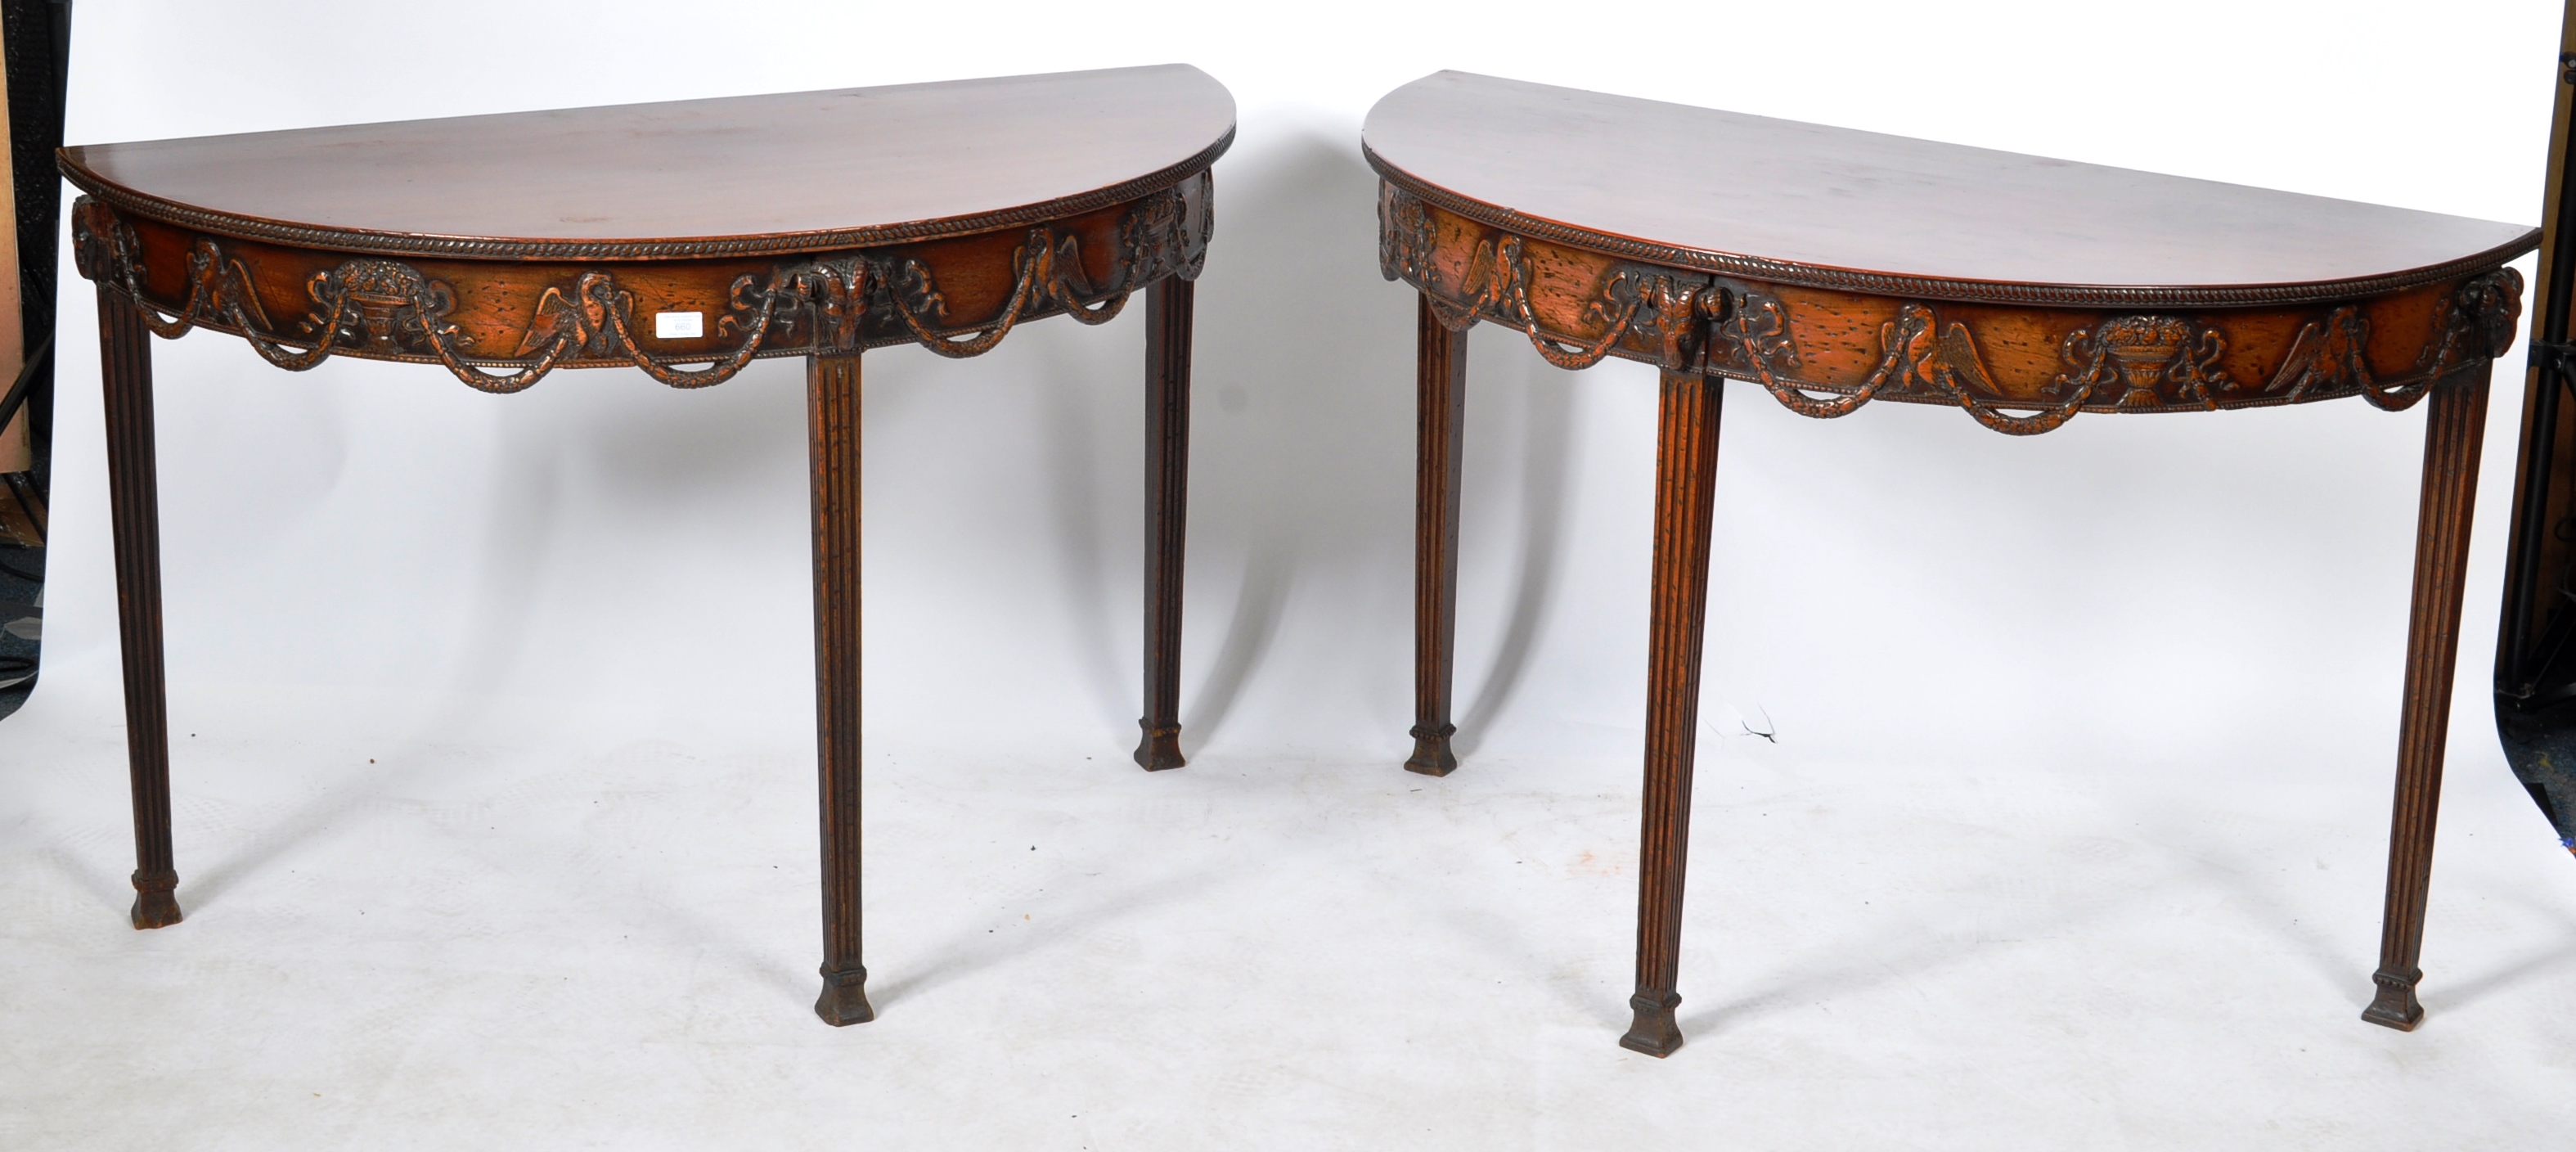 PAIR OF ROBERT ADAM MANNER CONSOLE TABLES - Image 2 of 9